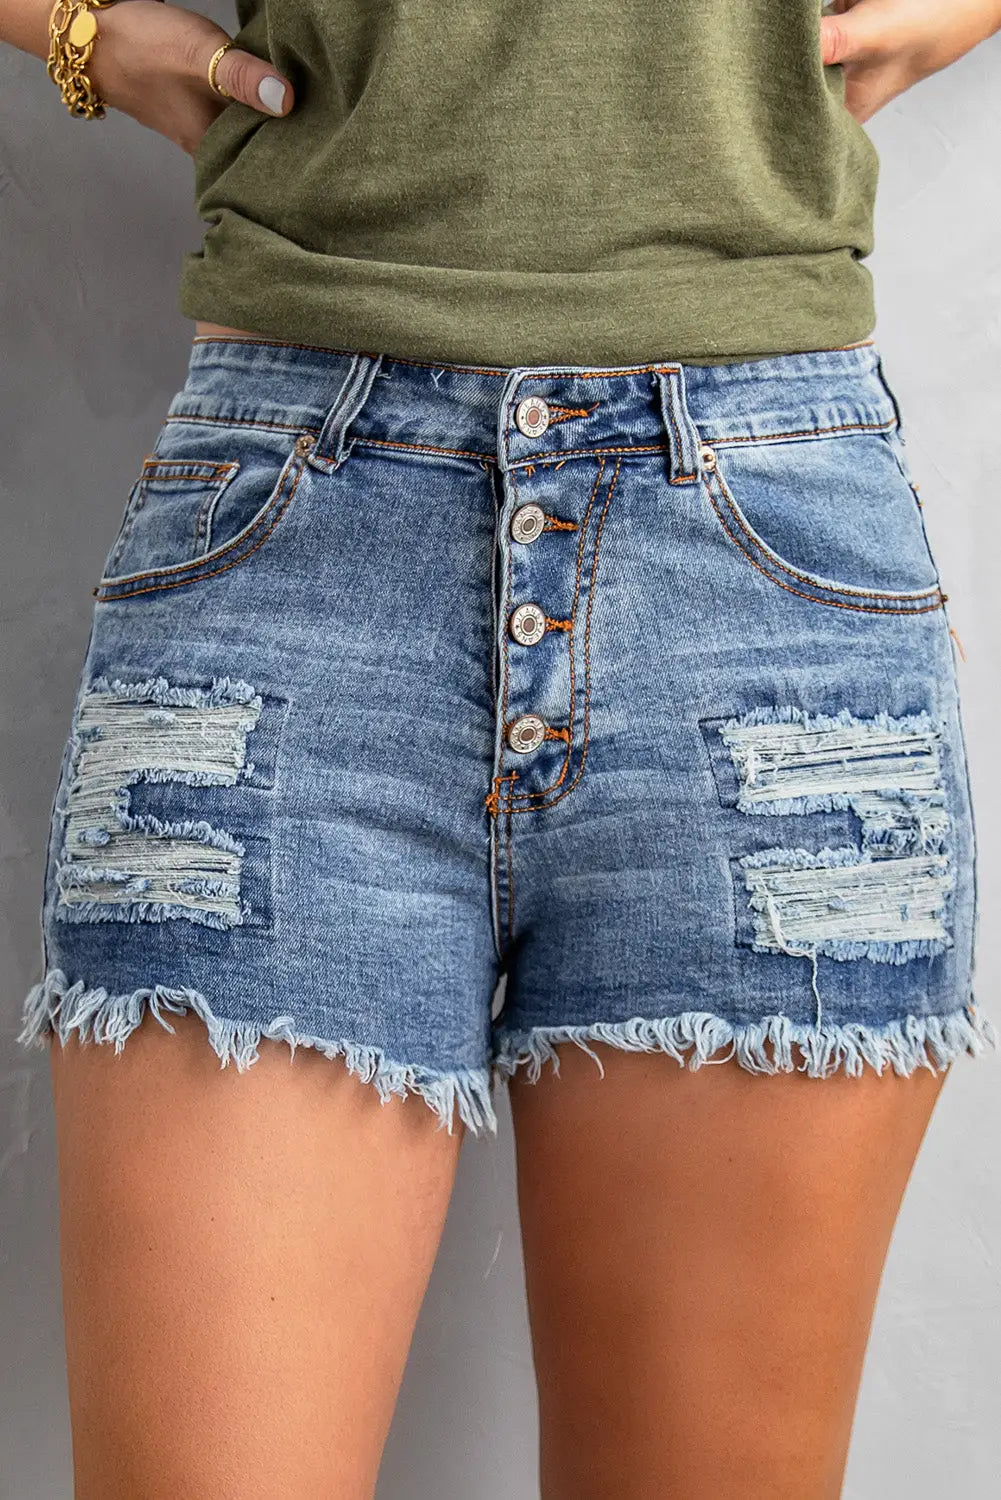 Sky blue gypsy mid-rise distressed denim shorts - s / 75% cotton + 24% polyester + 1% spandex